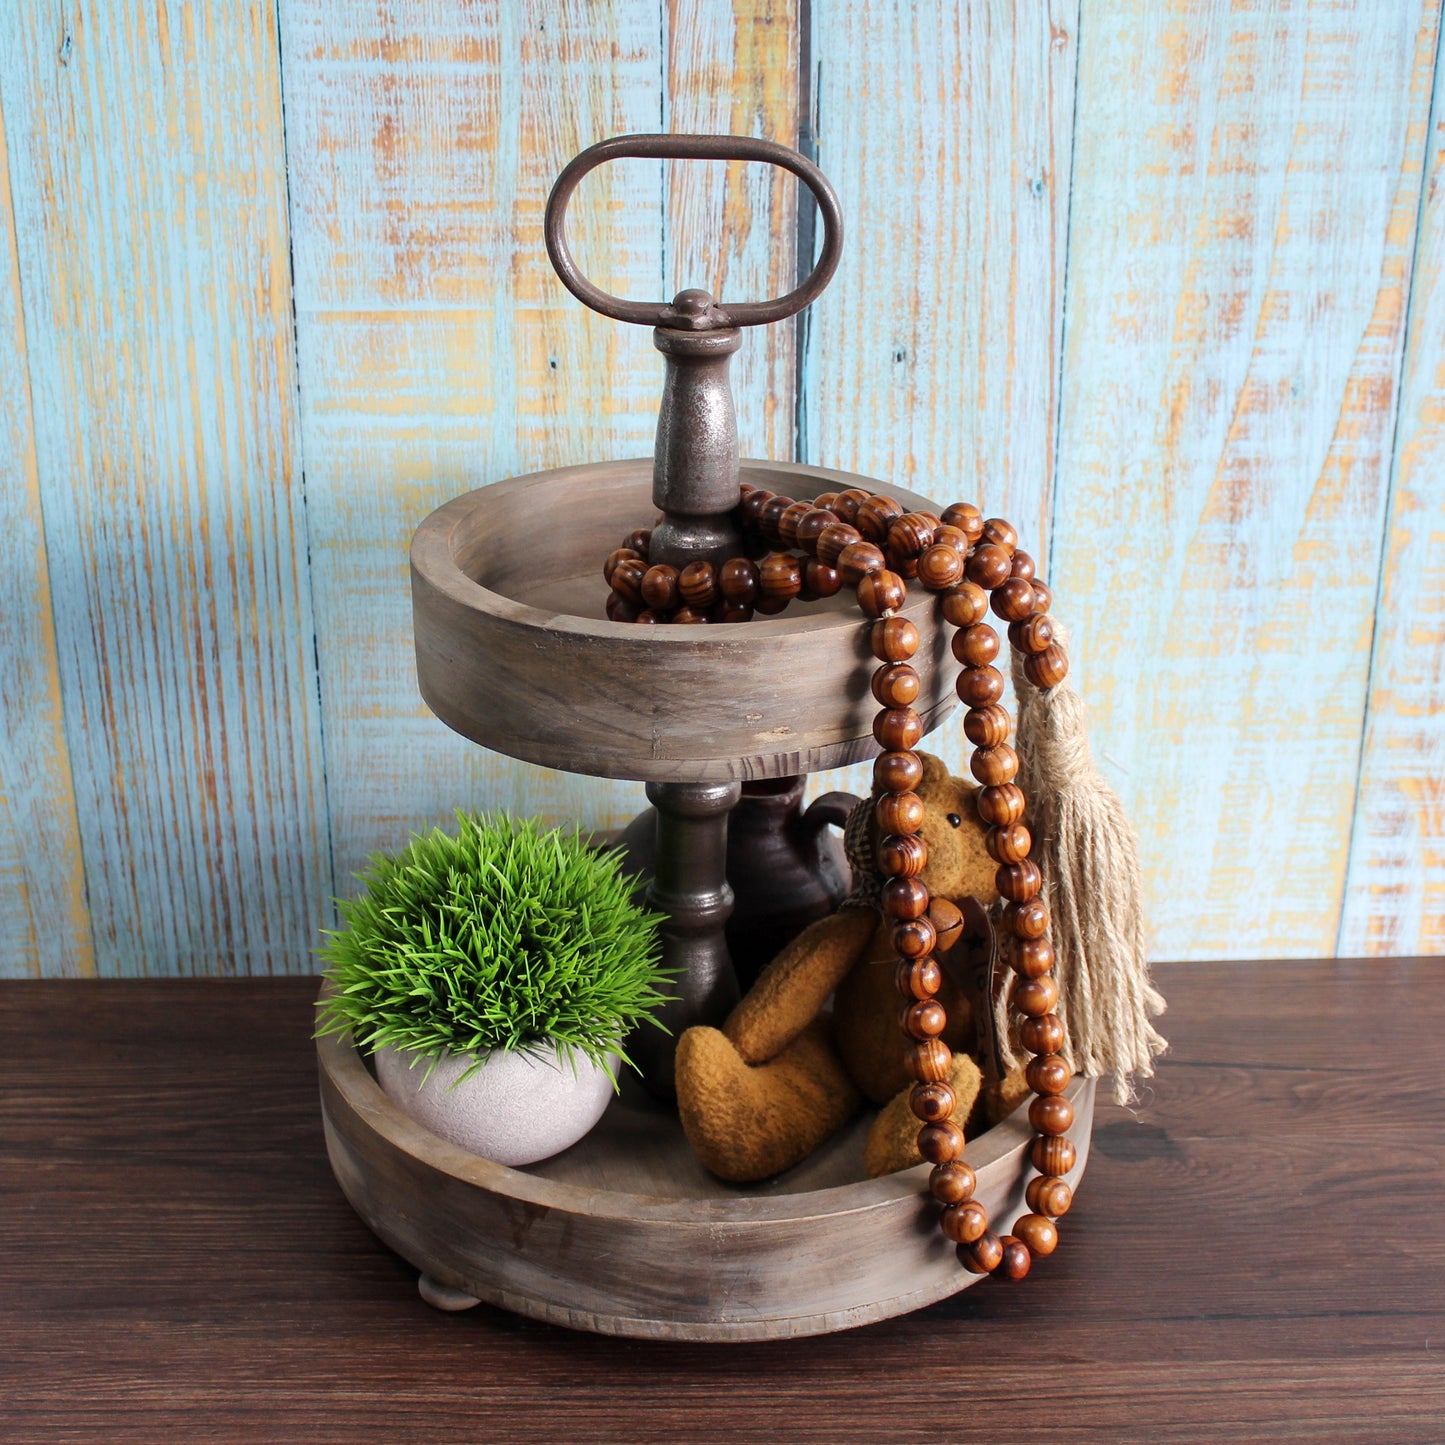 CVHOMEDECO. Wood Grain Beads Garland with Tassels Farmhouse Rustic Wooden Prayer Bead String Wall Hanging Accent for Home Festival Decor. Dark Brown